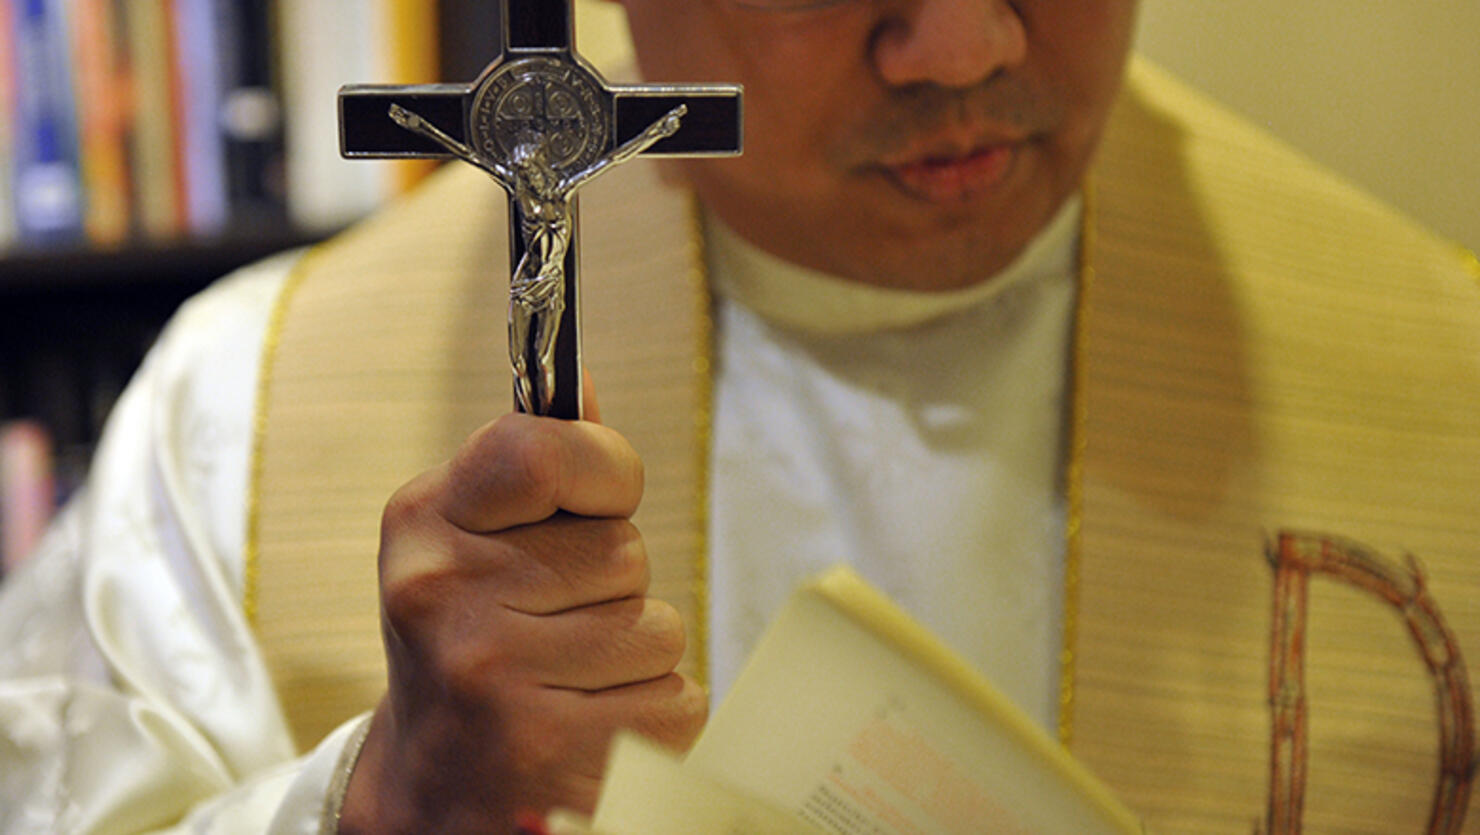 Father Jose Francisco Syquia, head of the Manila Archdiocese's Office of Exorcism, prays at his office